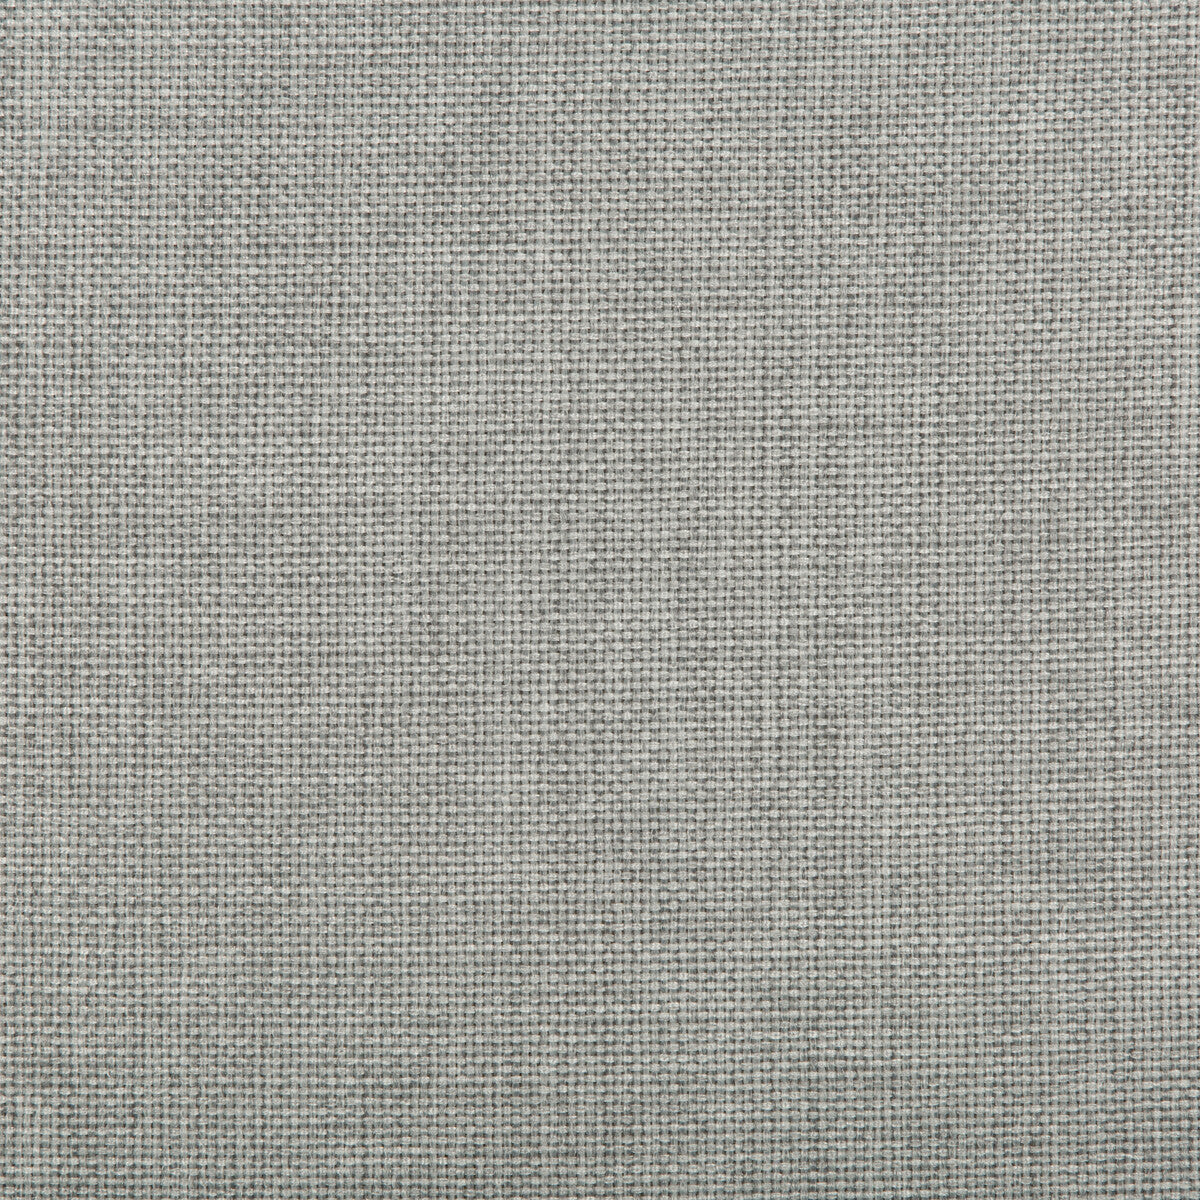 Kravet Contract fabric in 4637-115 color - pattern 4637.115.0 - by Kravet Contract